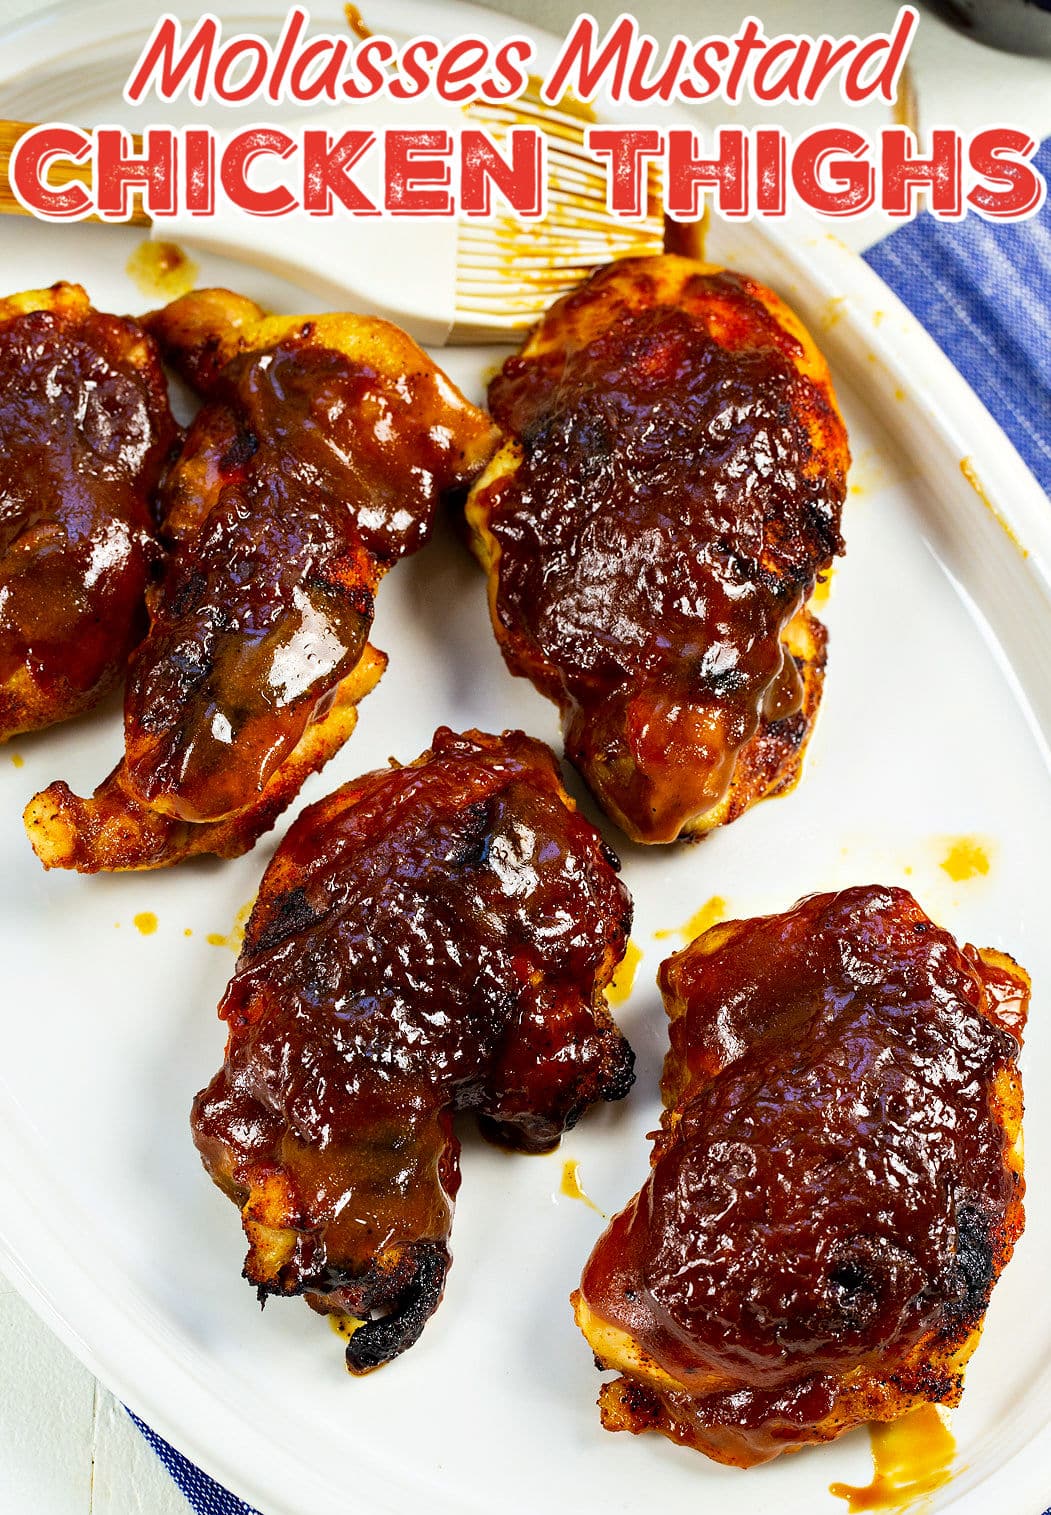 Cooked chicken with glaze on a serving plate.